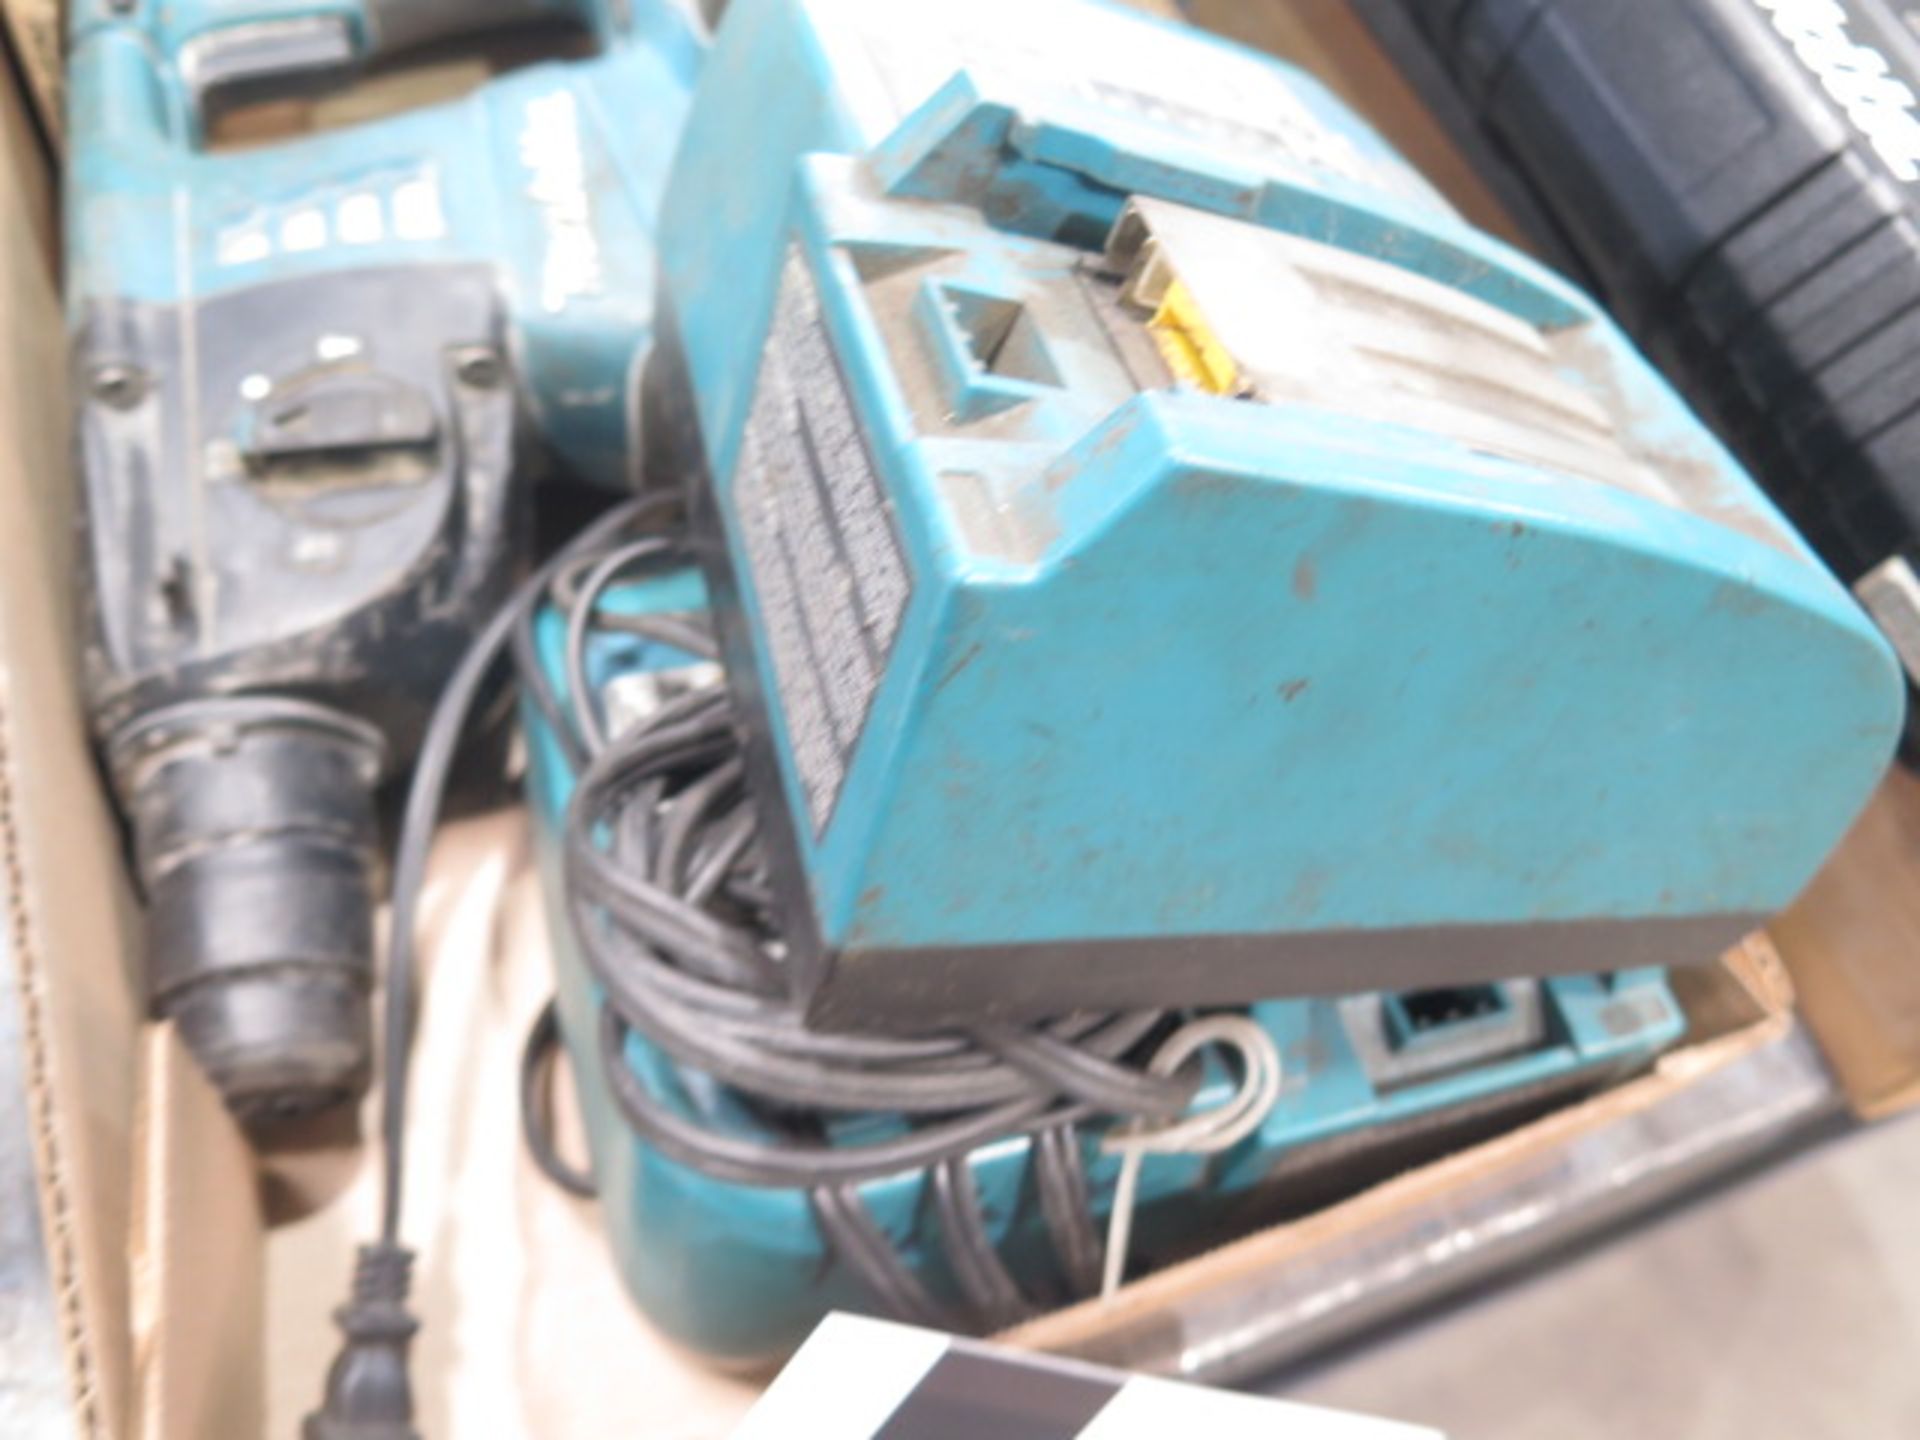 Makita 36V Cordless Hammer Drill w/ Charger (SOLD AS-IS - NO WARRANTY) - Image 5 of 5